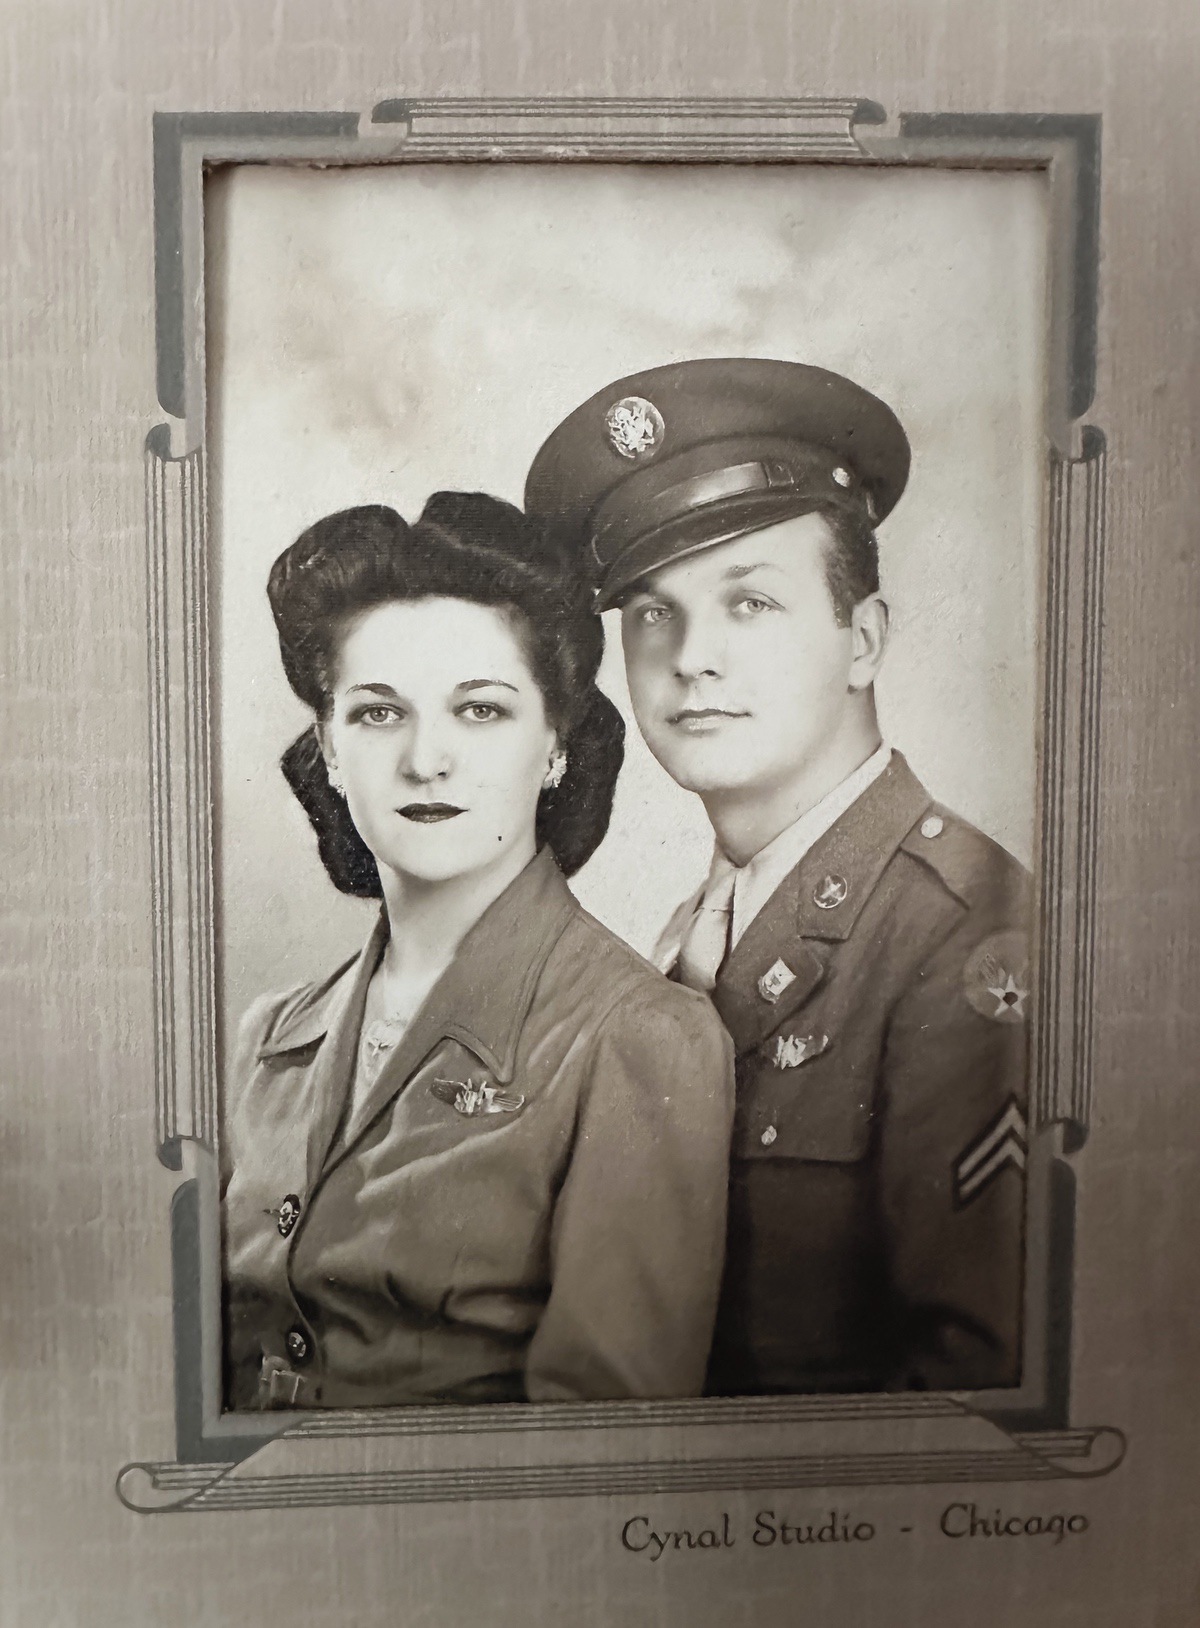 Mildred and Charles Krupsky pose in 1944: Mildred wearing a United States Post Office uniform, Charles in his U.S. Army Air Forces uniform. When Charles was drafted in 1944, Mildred took over his job at the Post Office so he wouldn’t lose his position while he was on active duty.